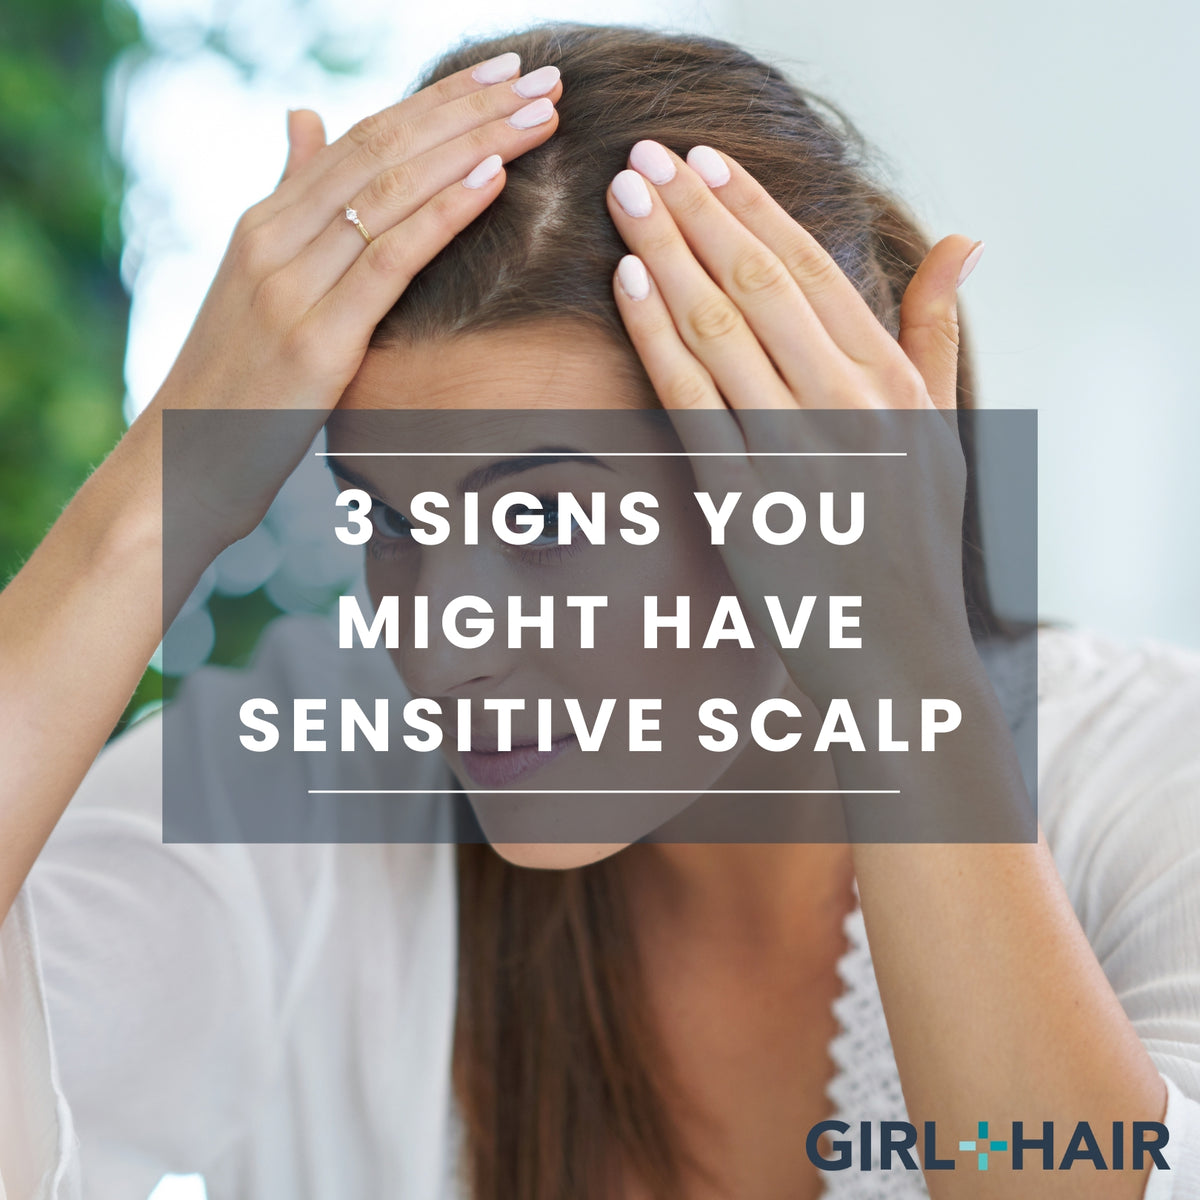 3 Signs of a Sensitive Scalp You Shouldn't Ignore